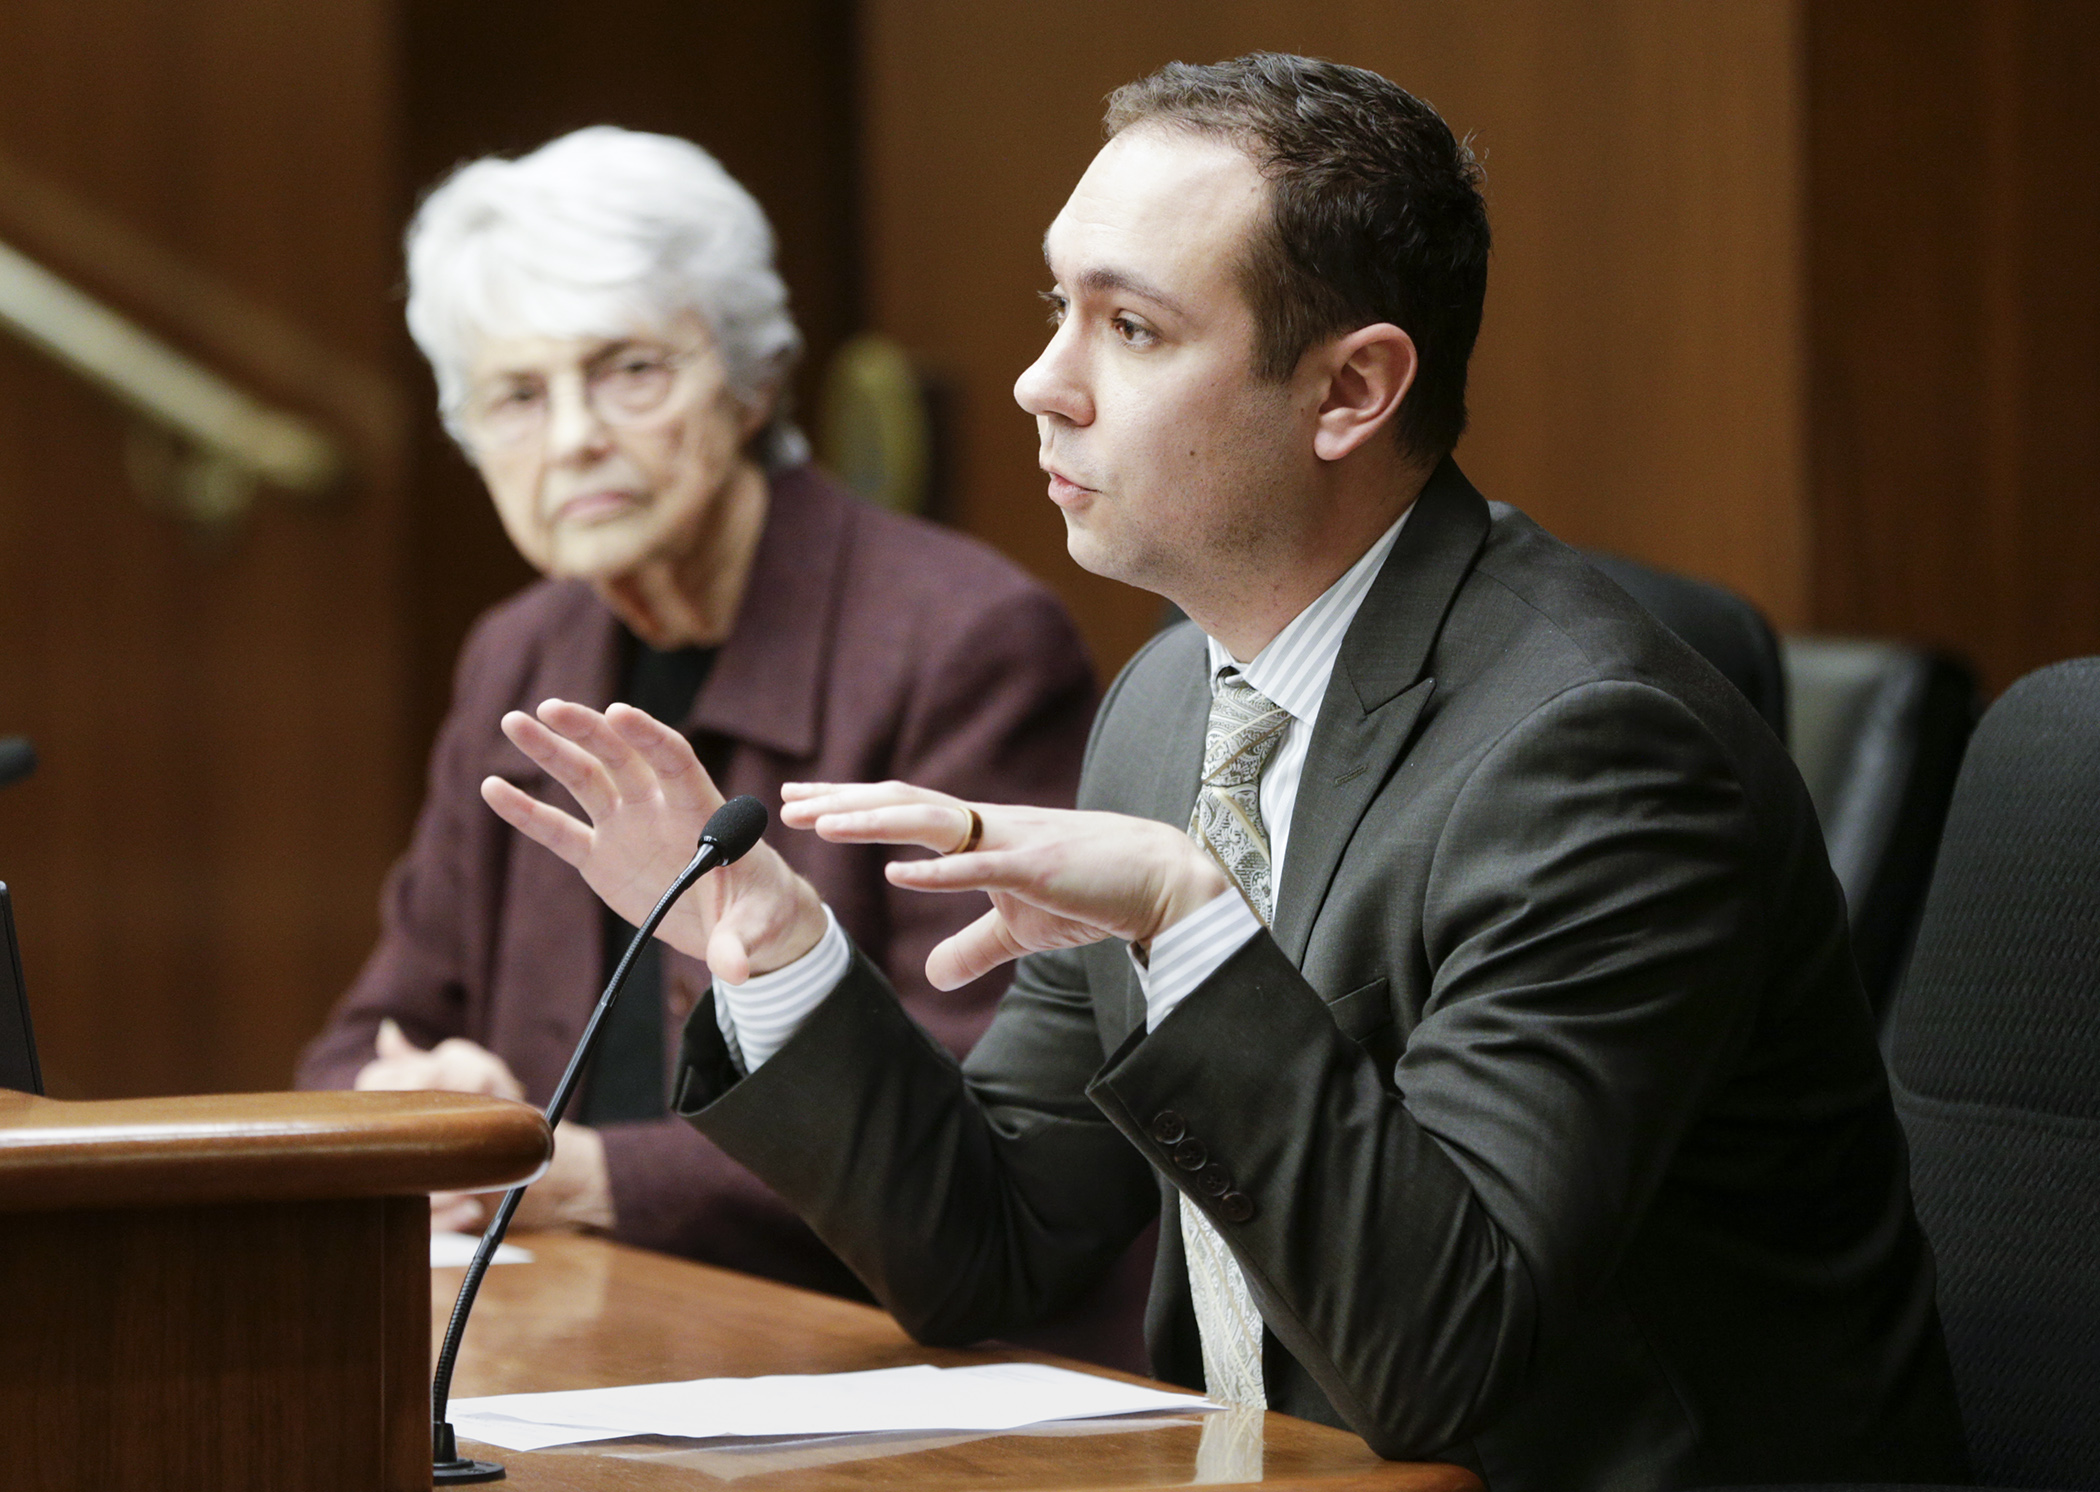 David Shaffer of Minnesota Solar Energy testifies in favor of HF3675, sponsored by Rep. Jean Wagenius, left. It would provide grant funding for public school district solar energy systems. Photo by Paul Battaglia